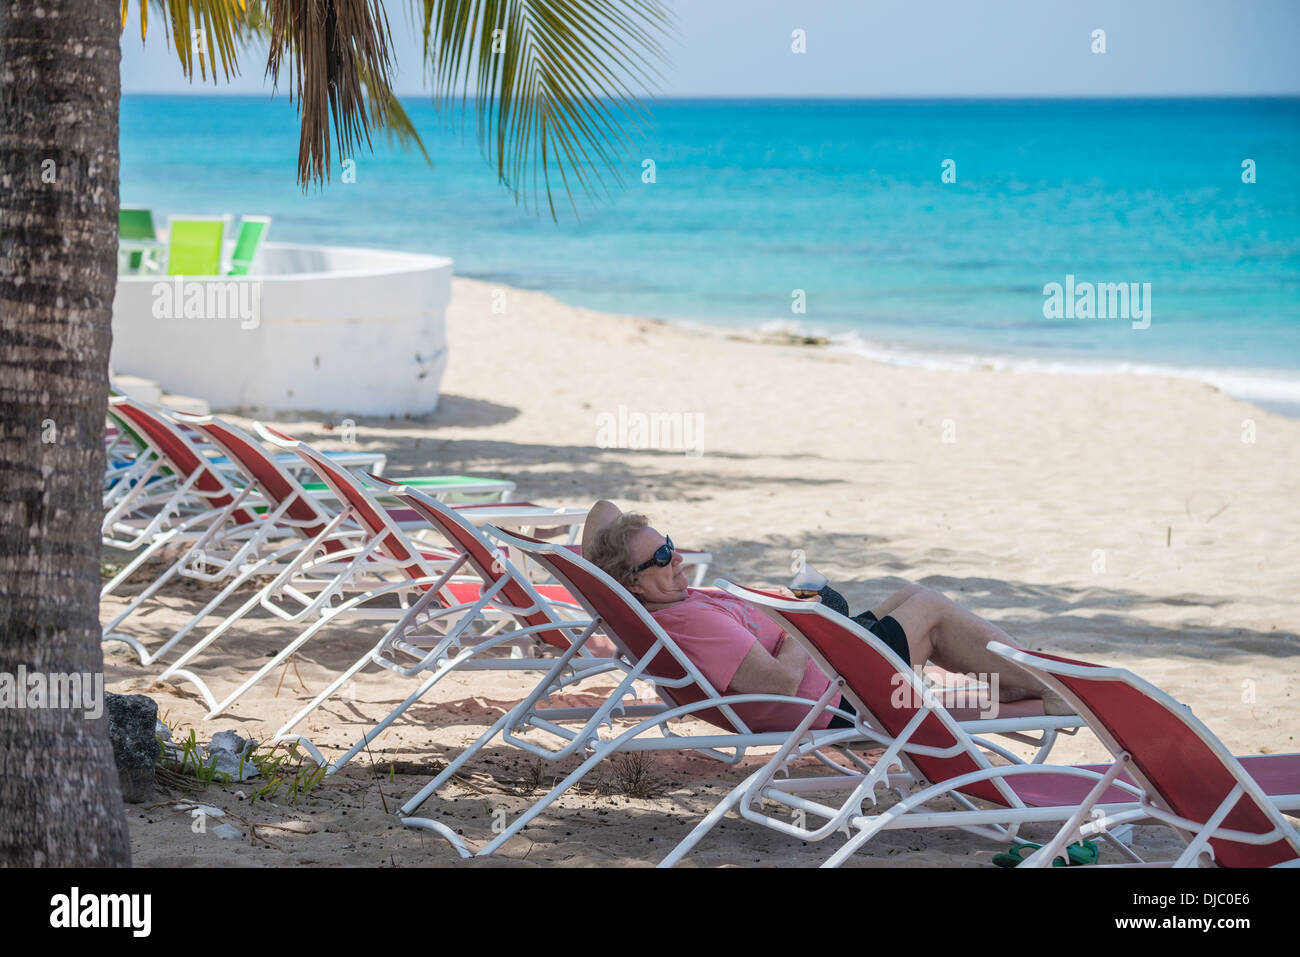 A 78 year old Caucasian woman relaxes in a chaise lounge on the beach in St. Croix, U.S. Virgin Islands. Cottages by the Sea resort. Stock Photo